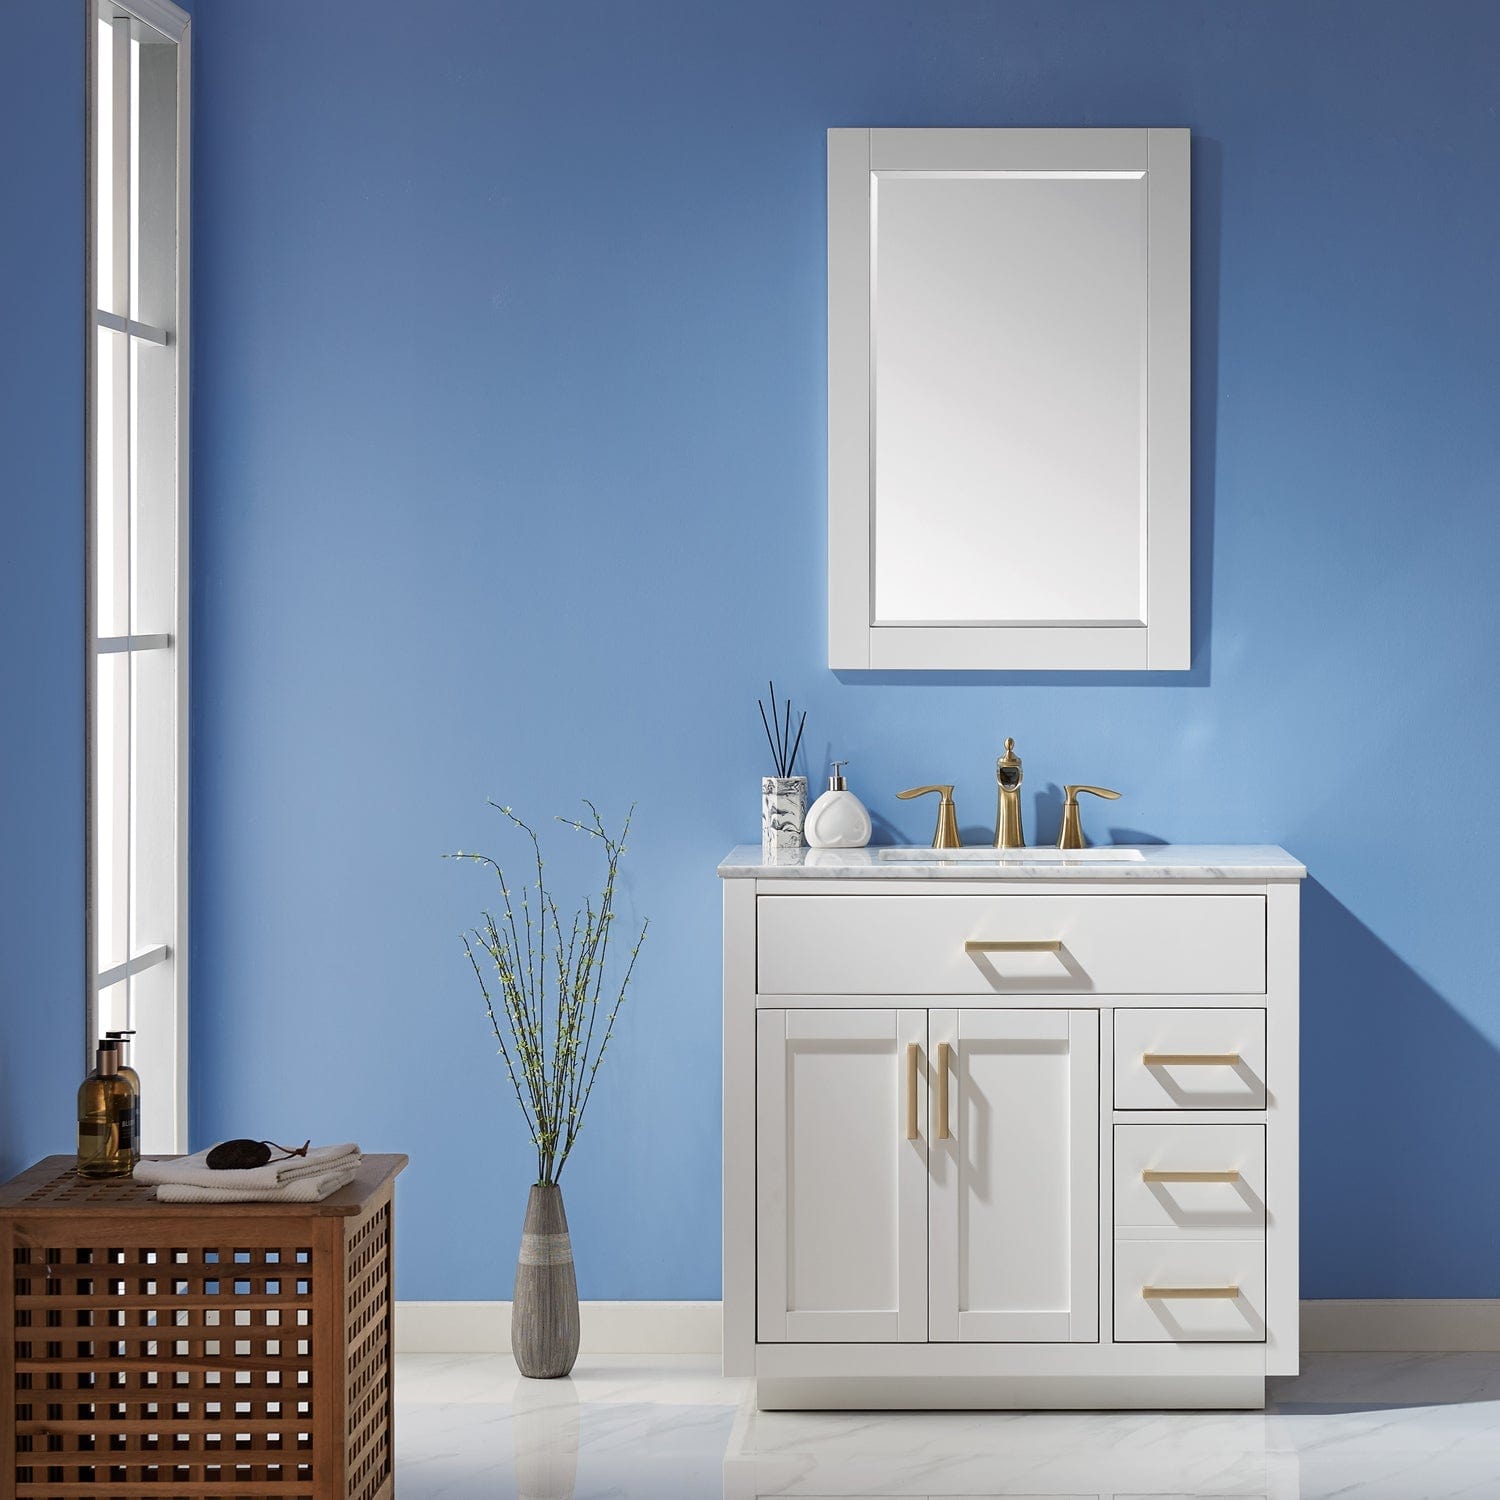 Altair Ivy 36" Single Bathroom Vanity Set in White and Carrara White Marble Countertop with Mirror 531036-WH-CA - Molaix631112971133Vanity531036-WH-CA